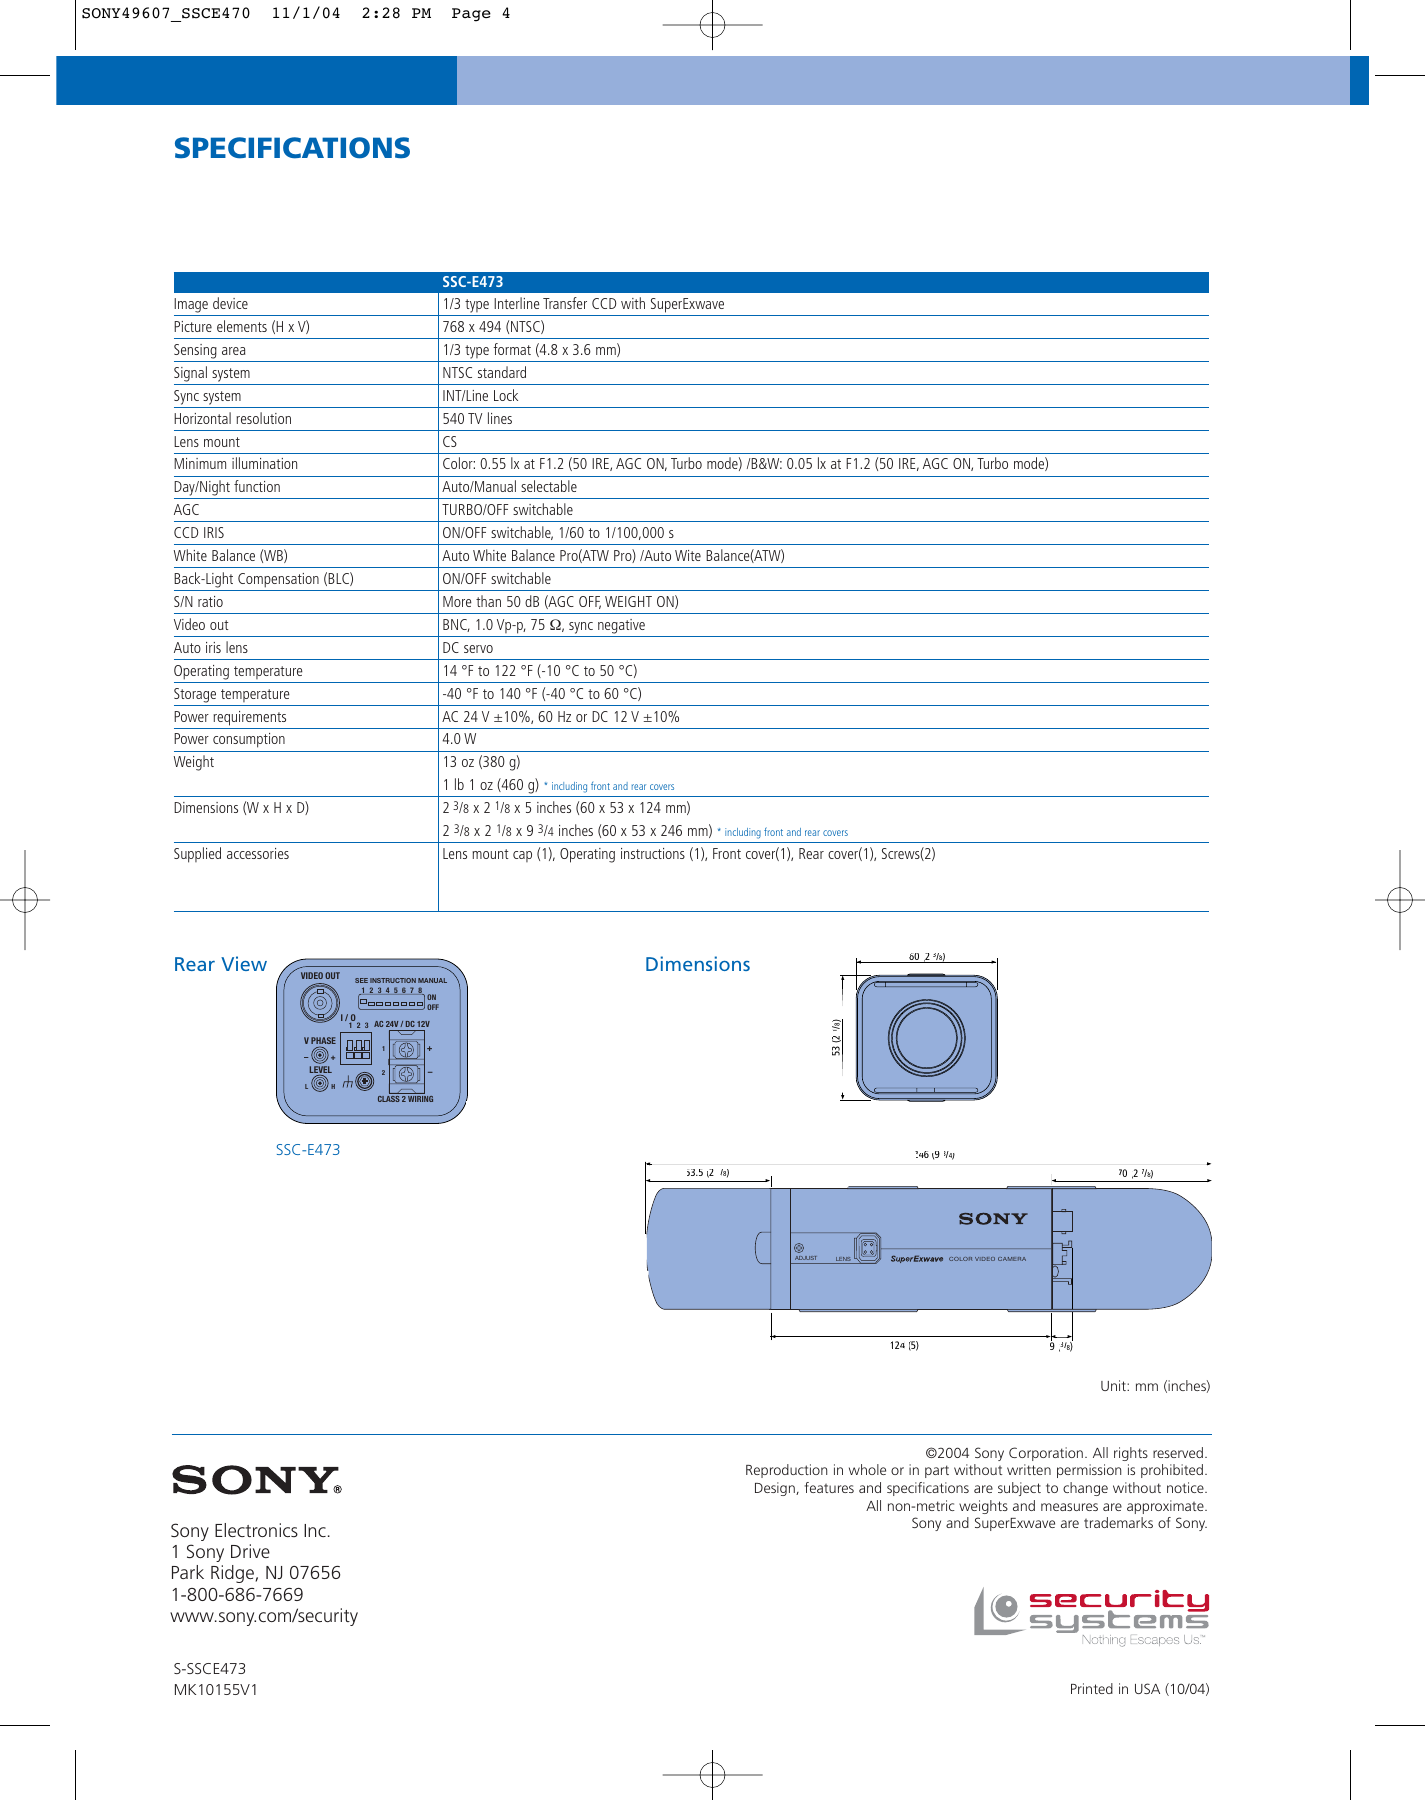 Page 4 of 4 - Sony SSC-E473 SONY49607_SSCE470 User Manual  To The B1fdcd14-bc60-4ef6-9a9b-49c58cca26d2